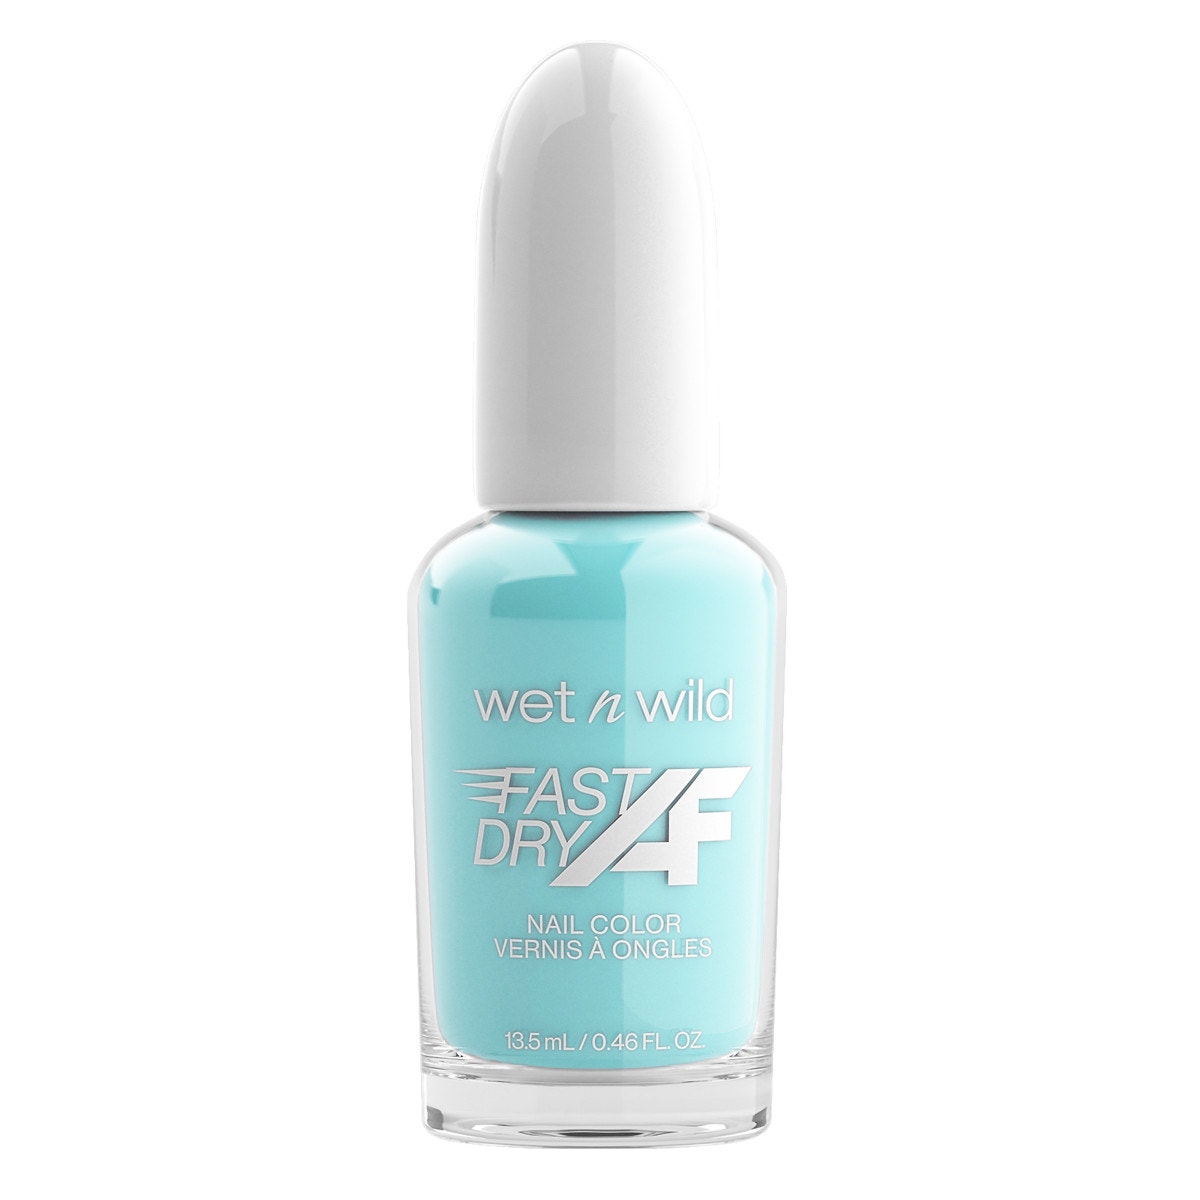 Maybelline Express Finish Aqua vintage nail polish swatches and review